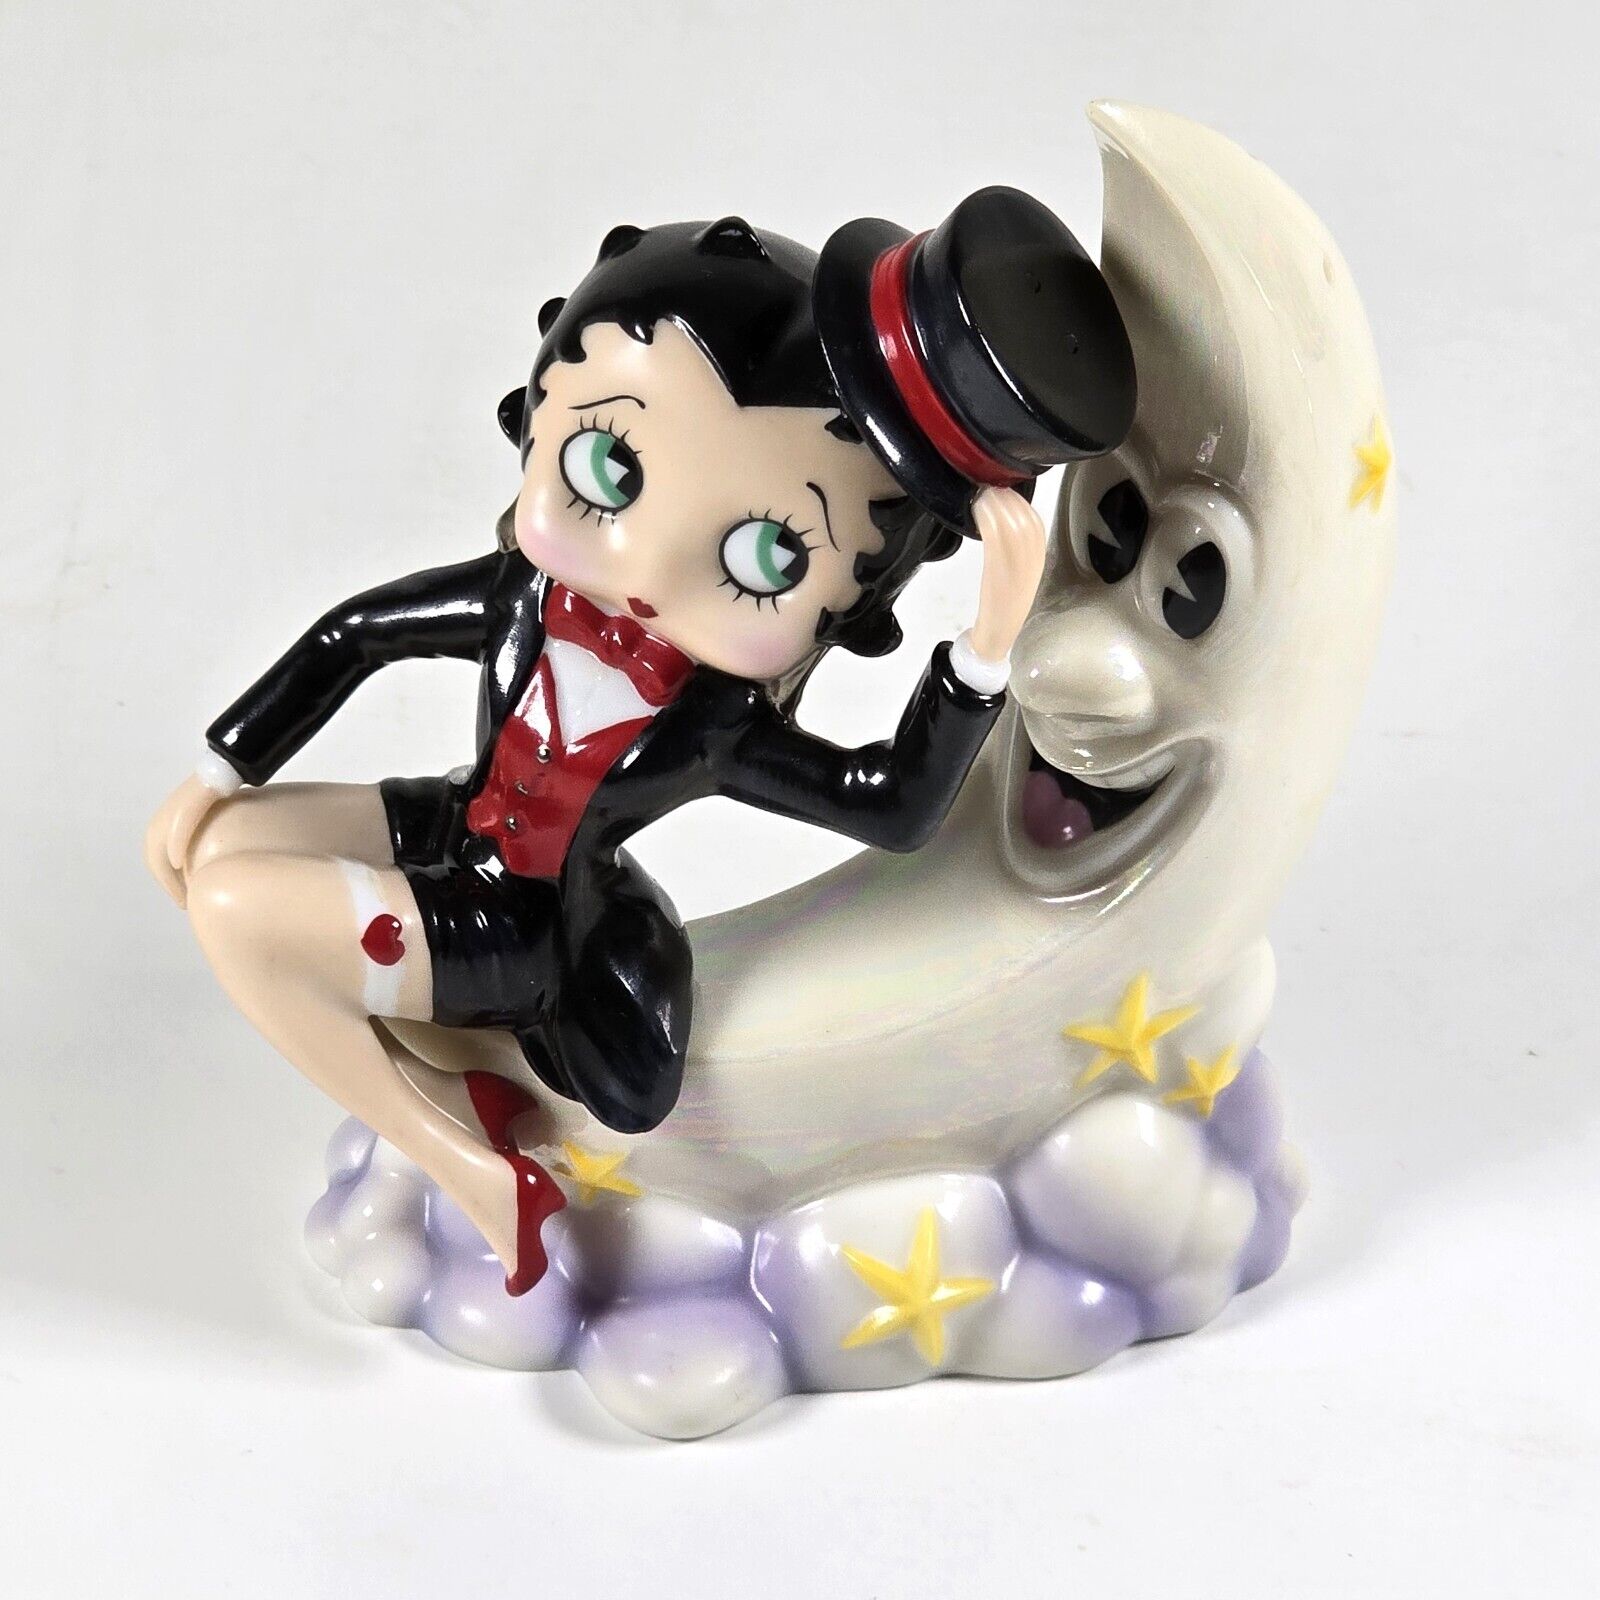 2000 Moonstruck Betty Boop Salt & Pepper Shakers Limited Edition Hand Painted